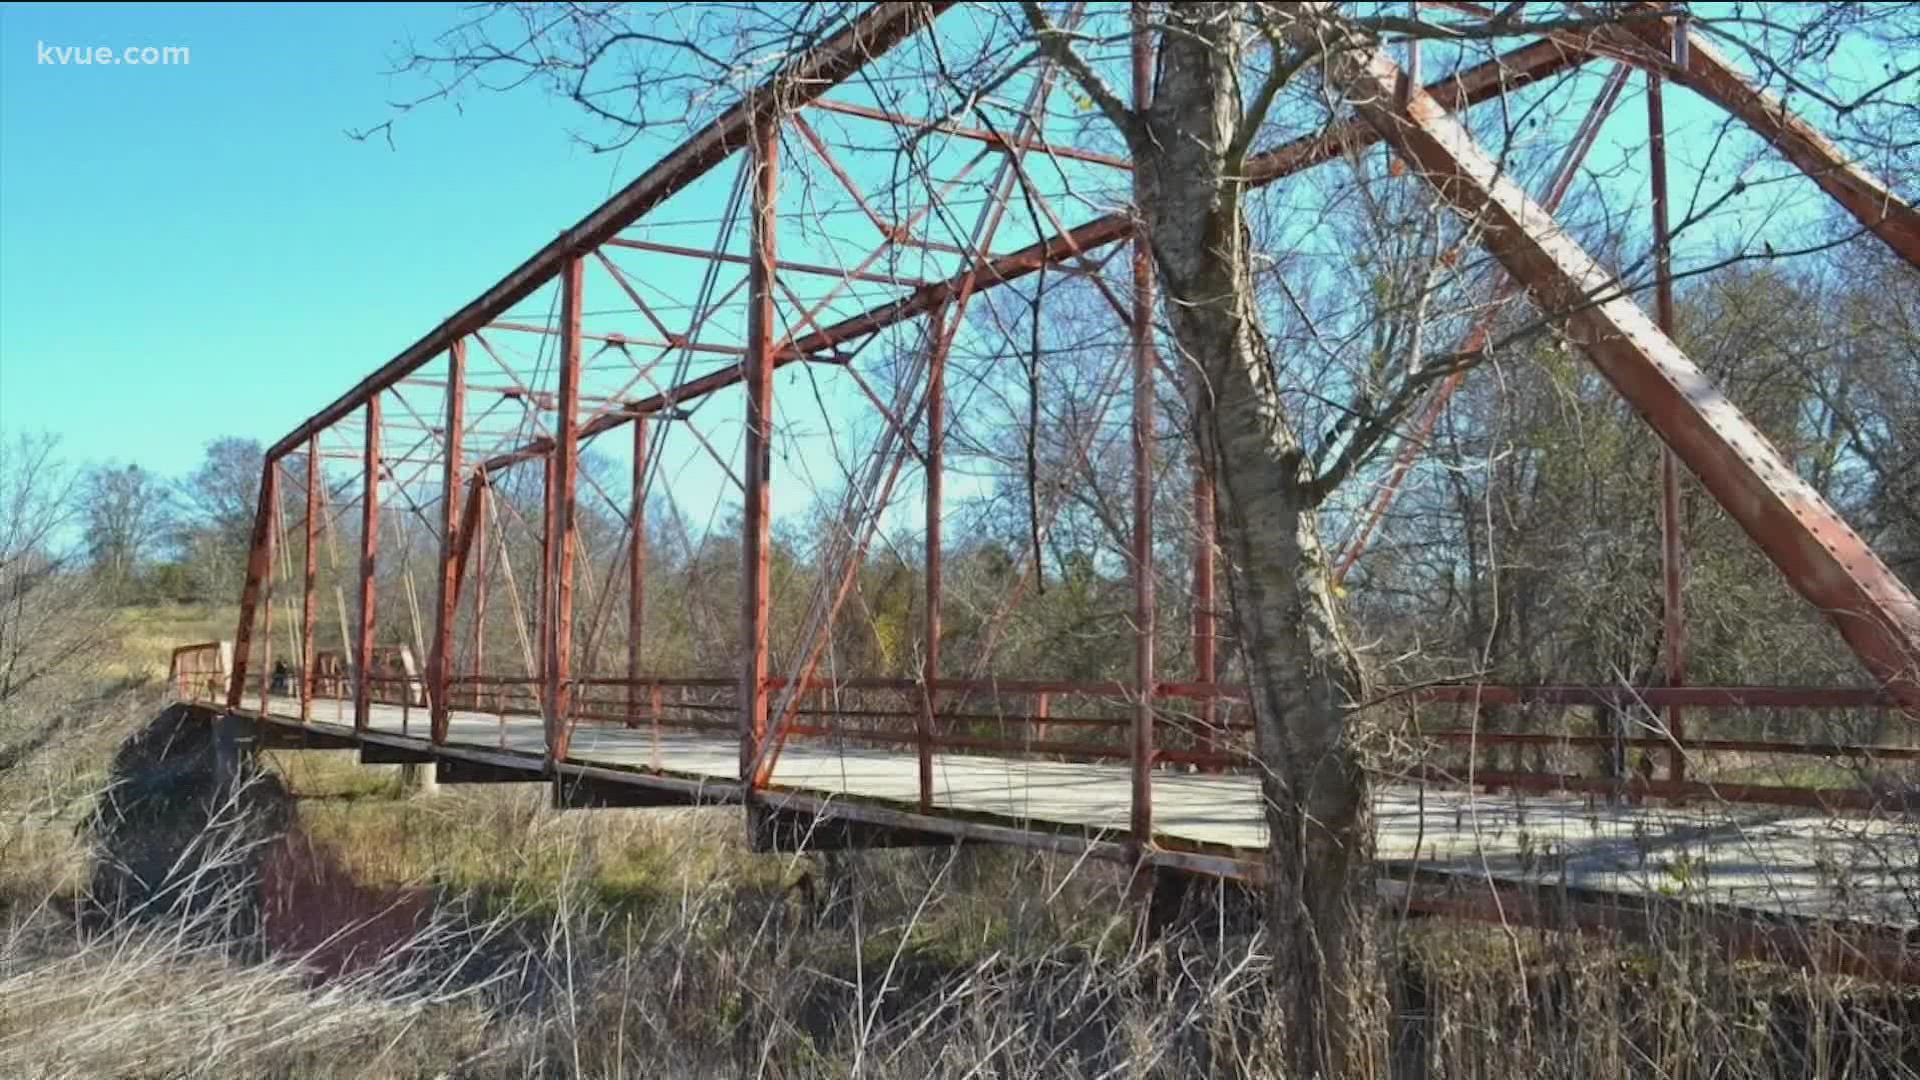 The Easley and Hoxie bridges east of Georgetown date back to the beginning of the 20th century, and one is said to be haunted.